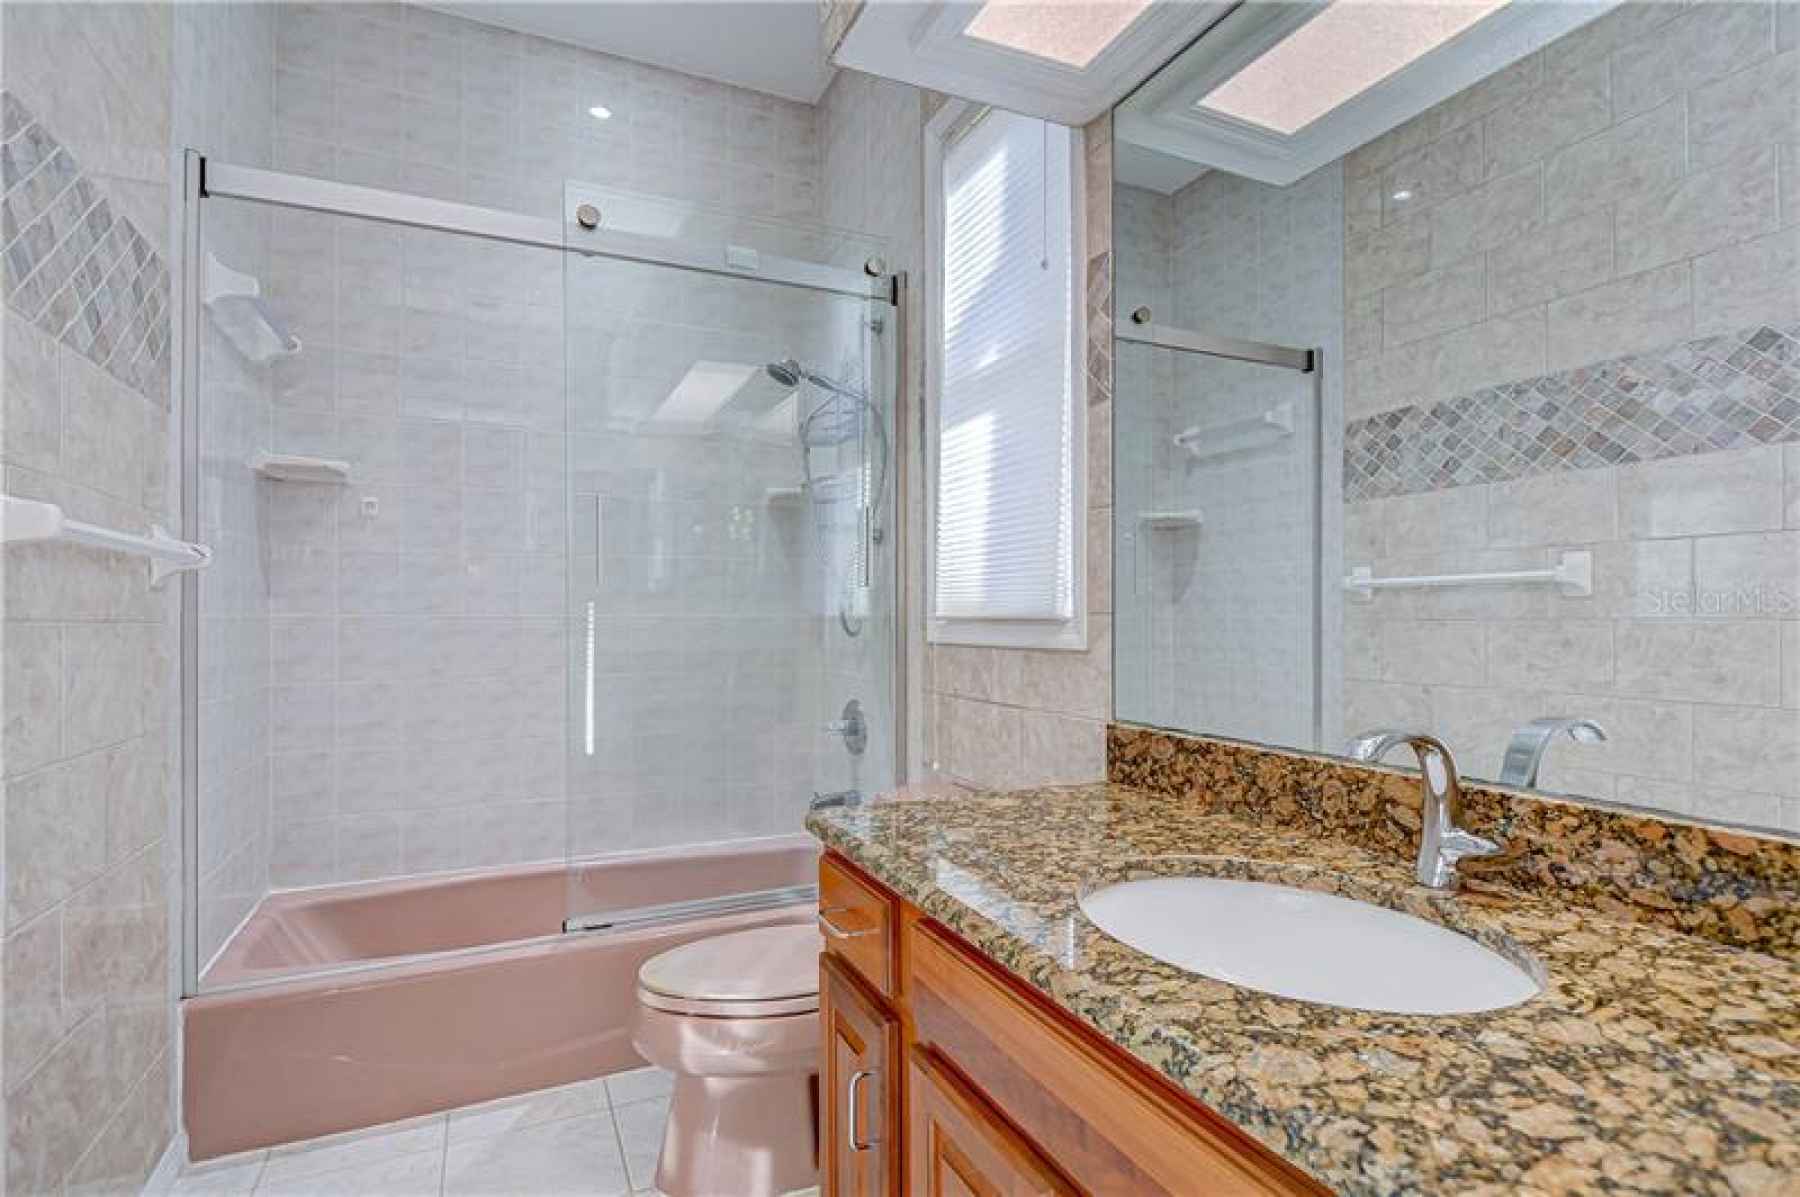 This bathroom is perfect for the kids!